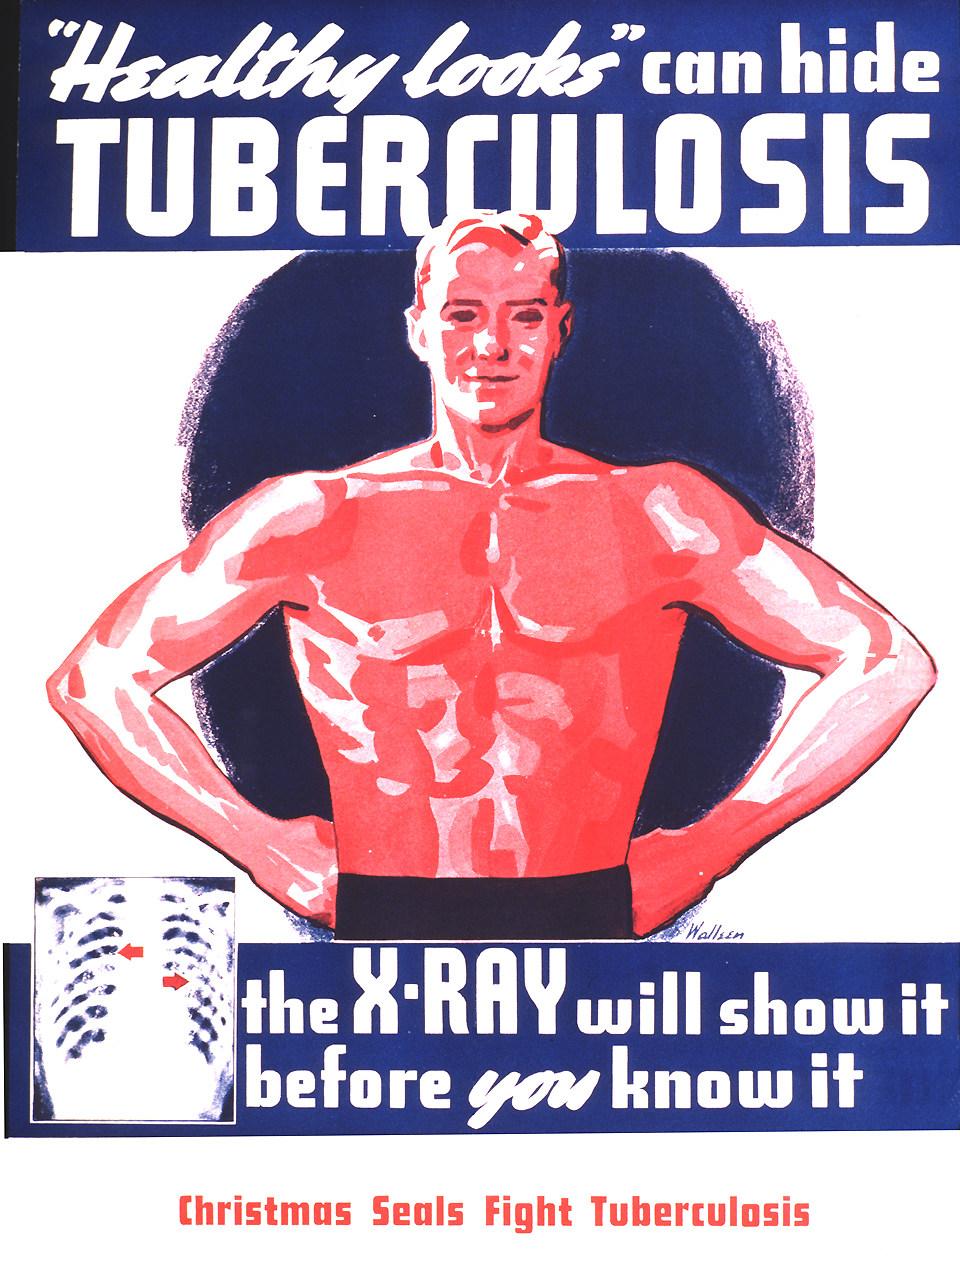 Visual shows a man from the waist up with his hands on his hips. He is bare chested and an x-ray of a chest with a couple of red arrows appears at the bottom left of the poster, beside the second part of the title.